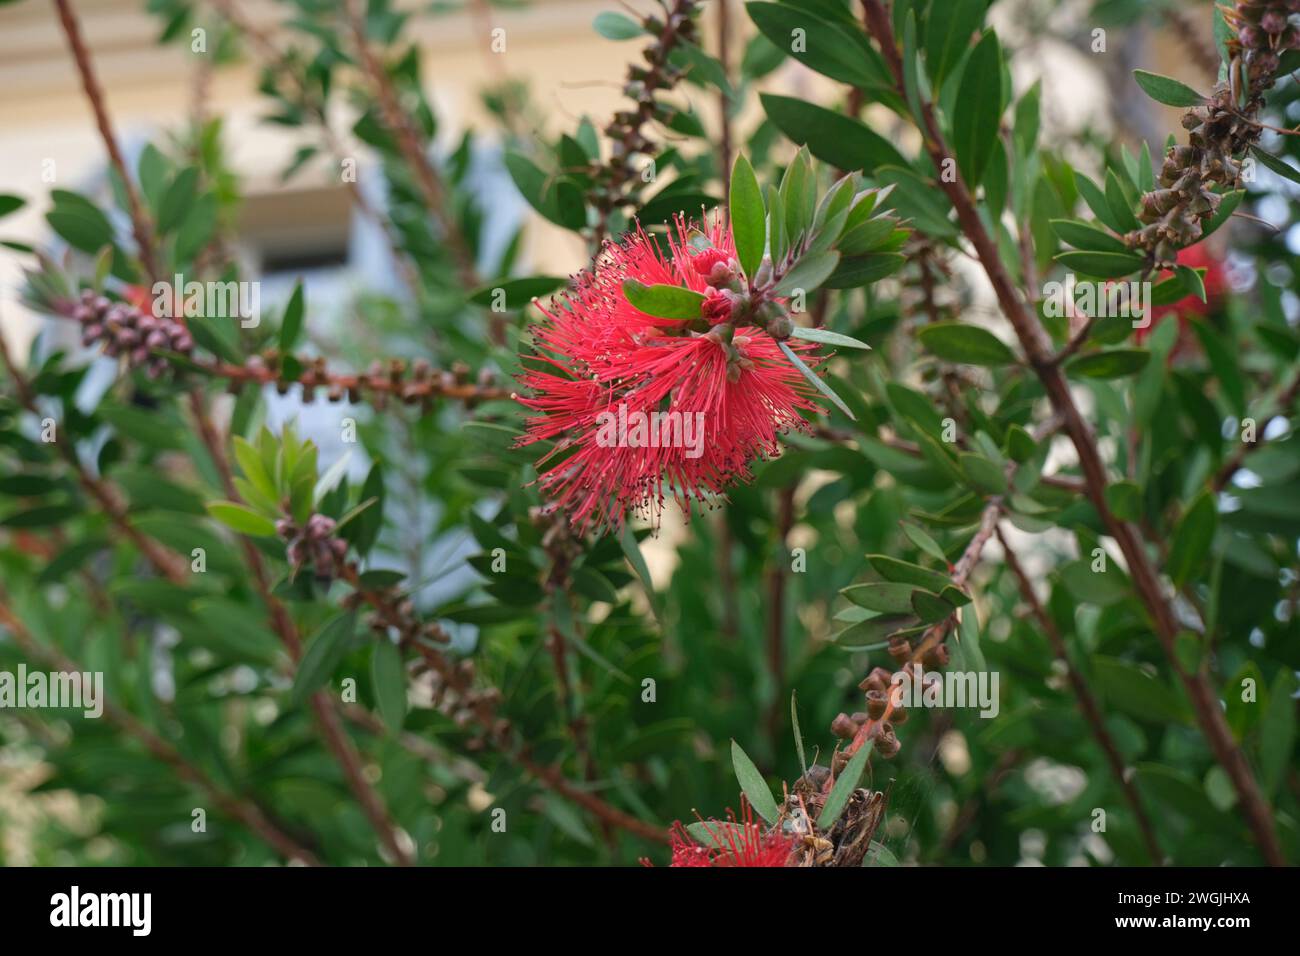 Red Melaleuca citrina flowers bush closeup. Floral natural background across the building Stock Photo